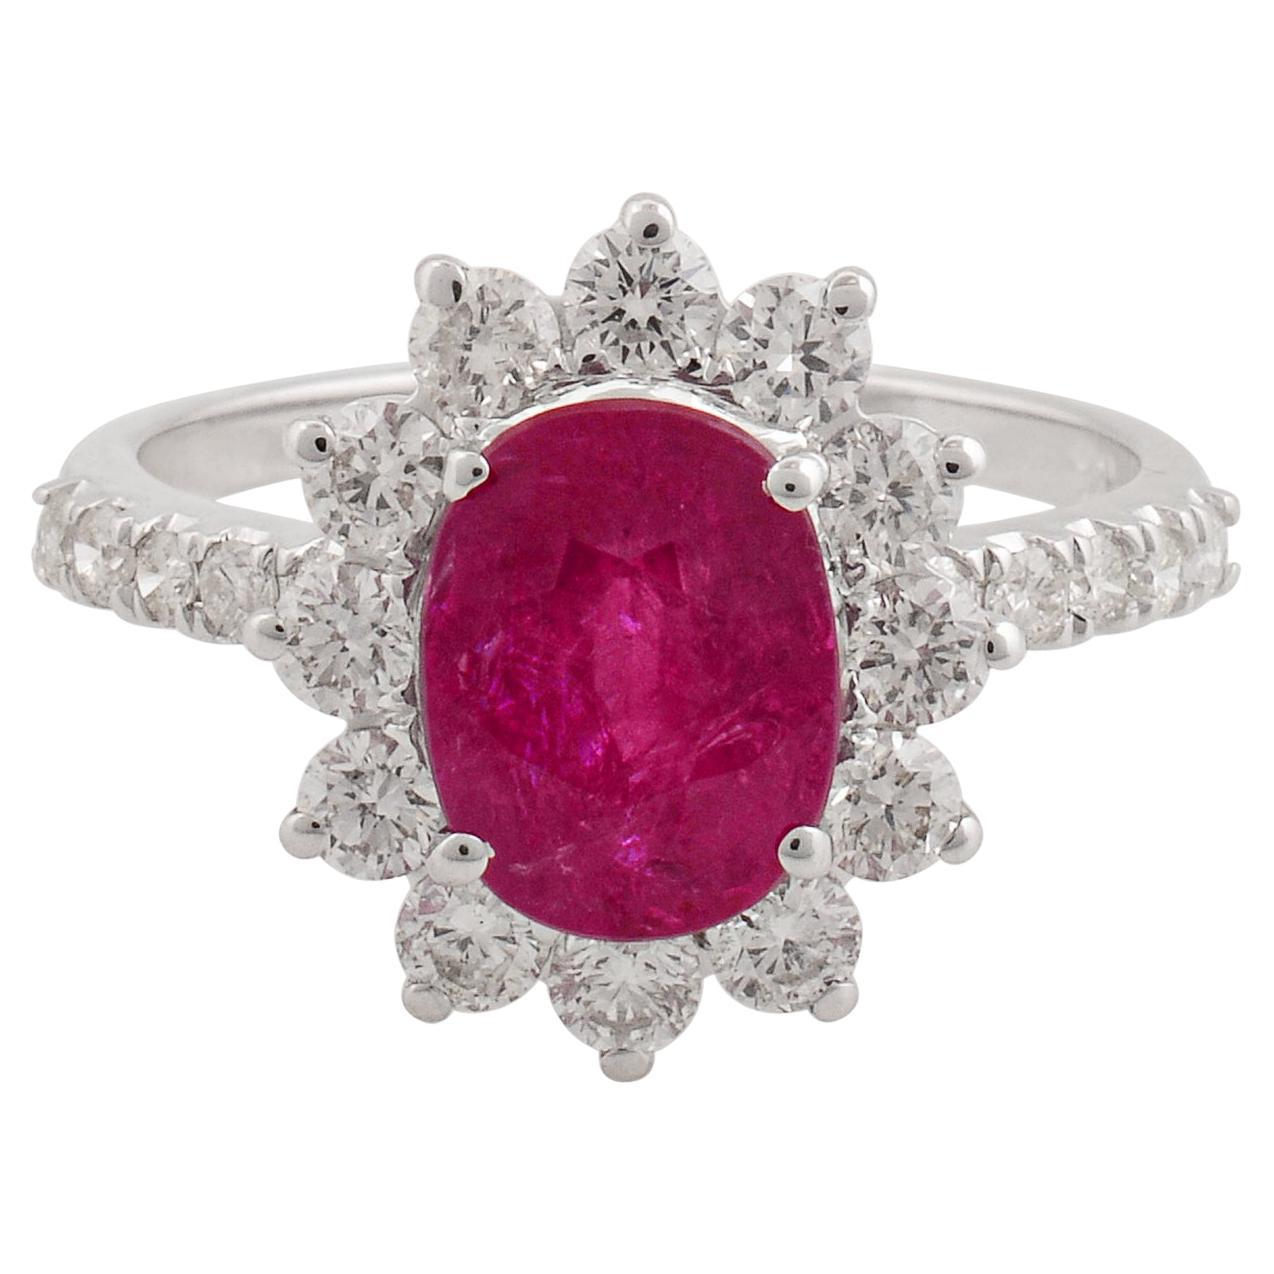 For Sale:  Ruby Gemstone Cocktail Ring SI Clarity HI Color Pave Diamond 18 Karat White Gold